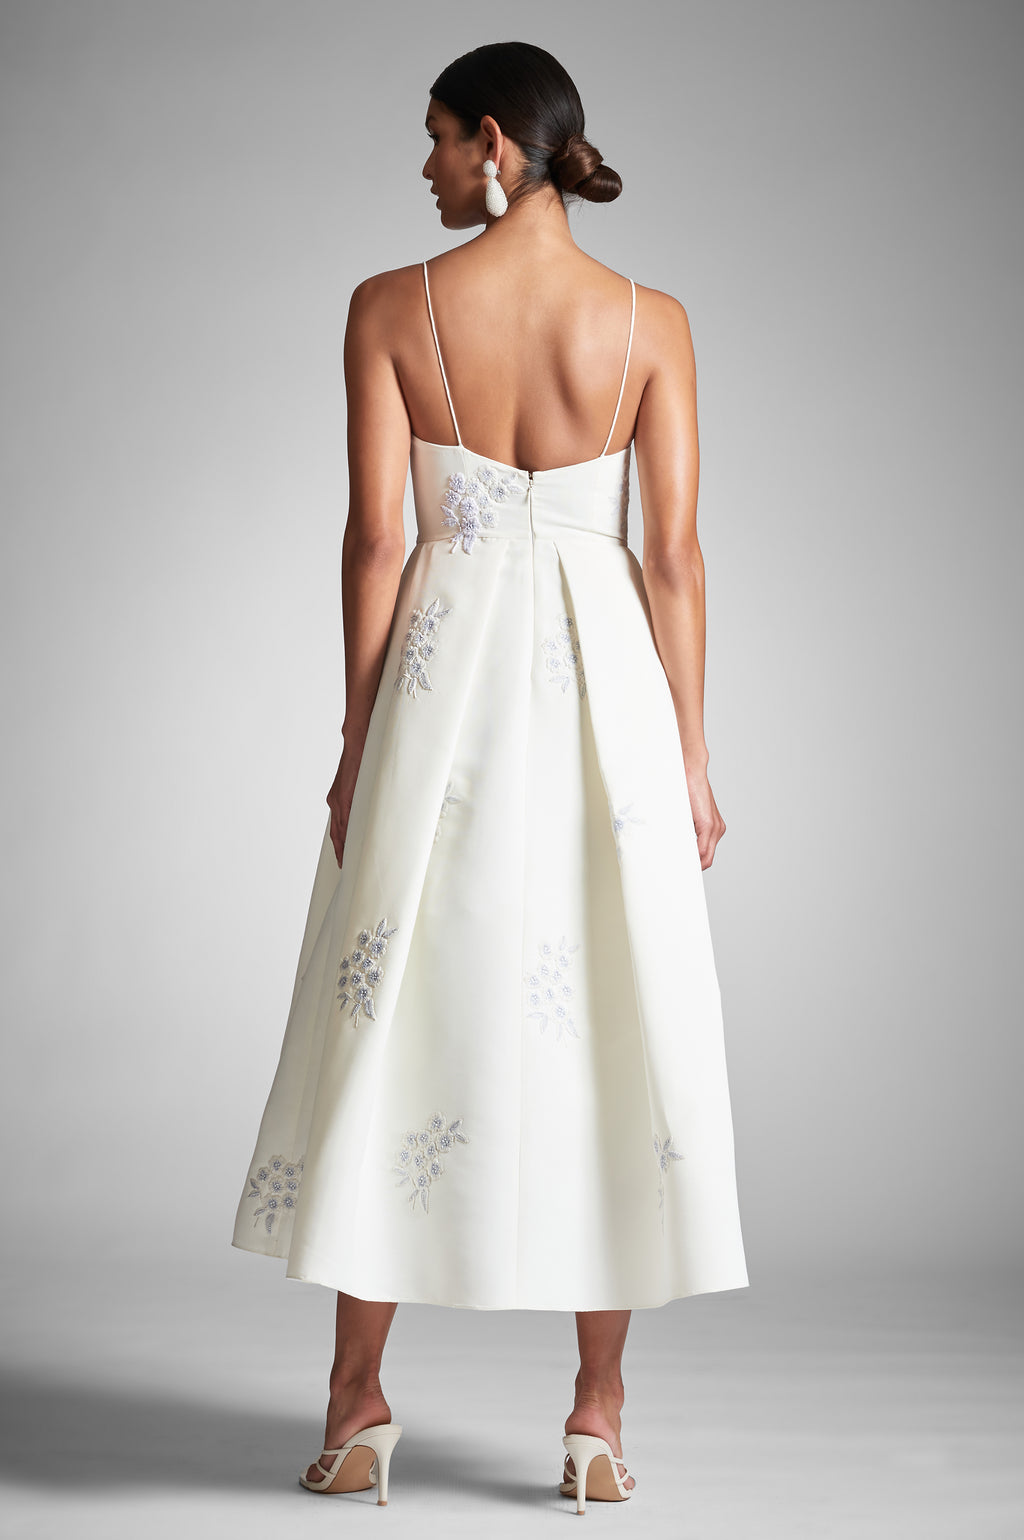 Audra Dress in Ivory/Embroidered Floral - Sachin & Babi